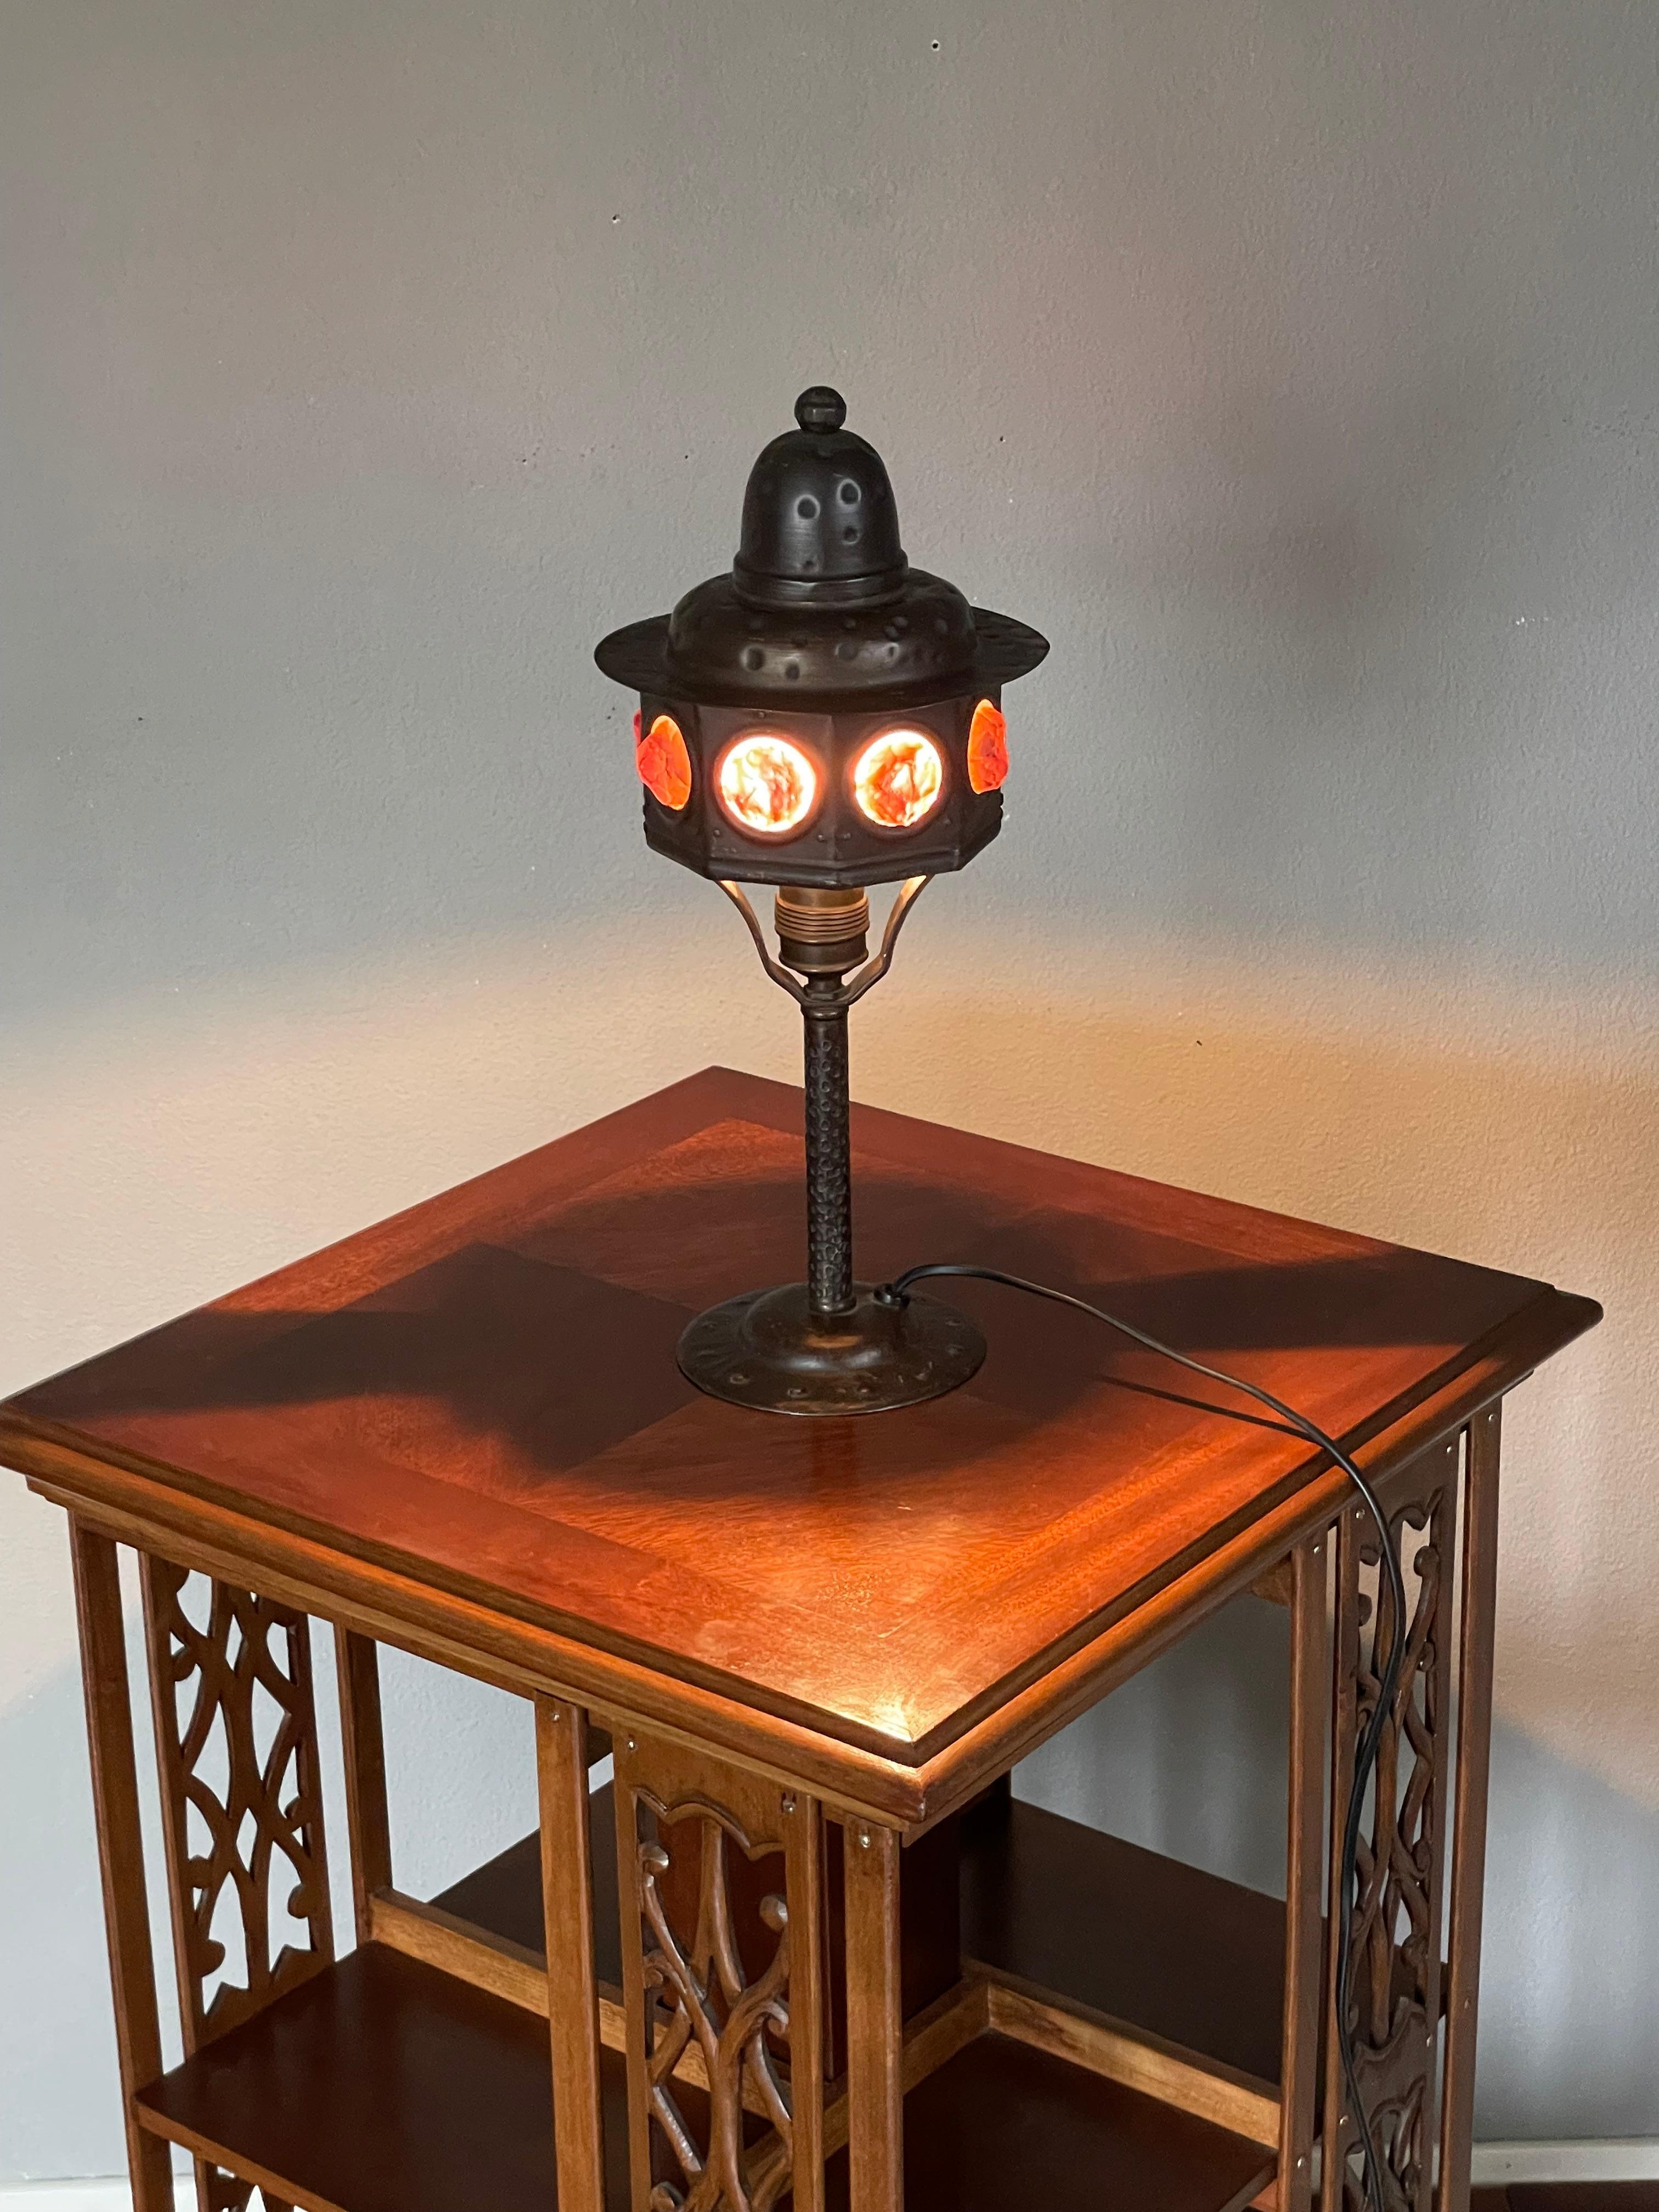 Early 1900s Wrought Iron & Chunky Glass-Like Arts and Crafts Table / Desk Lamp For Sale 7